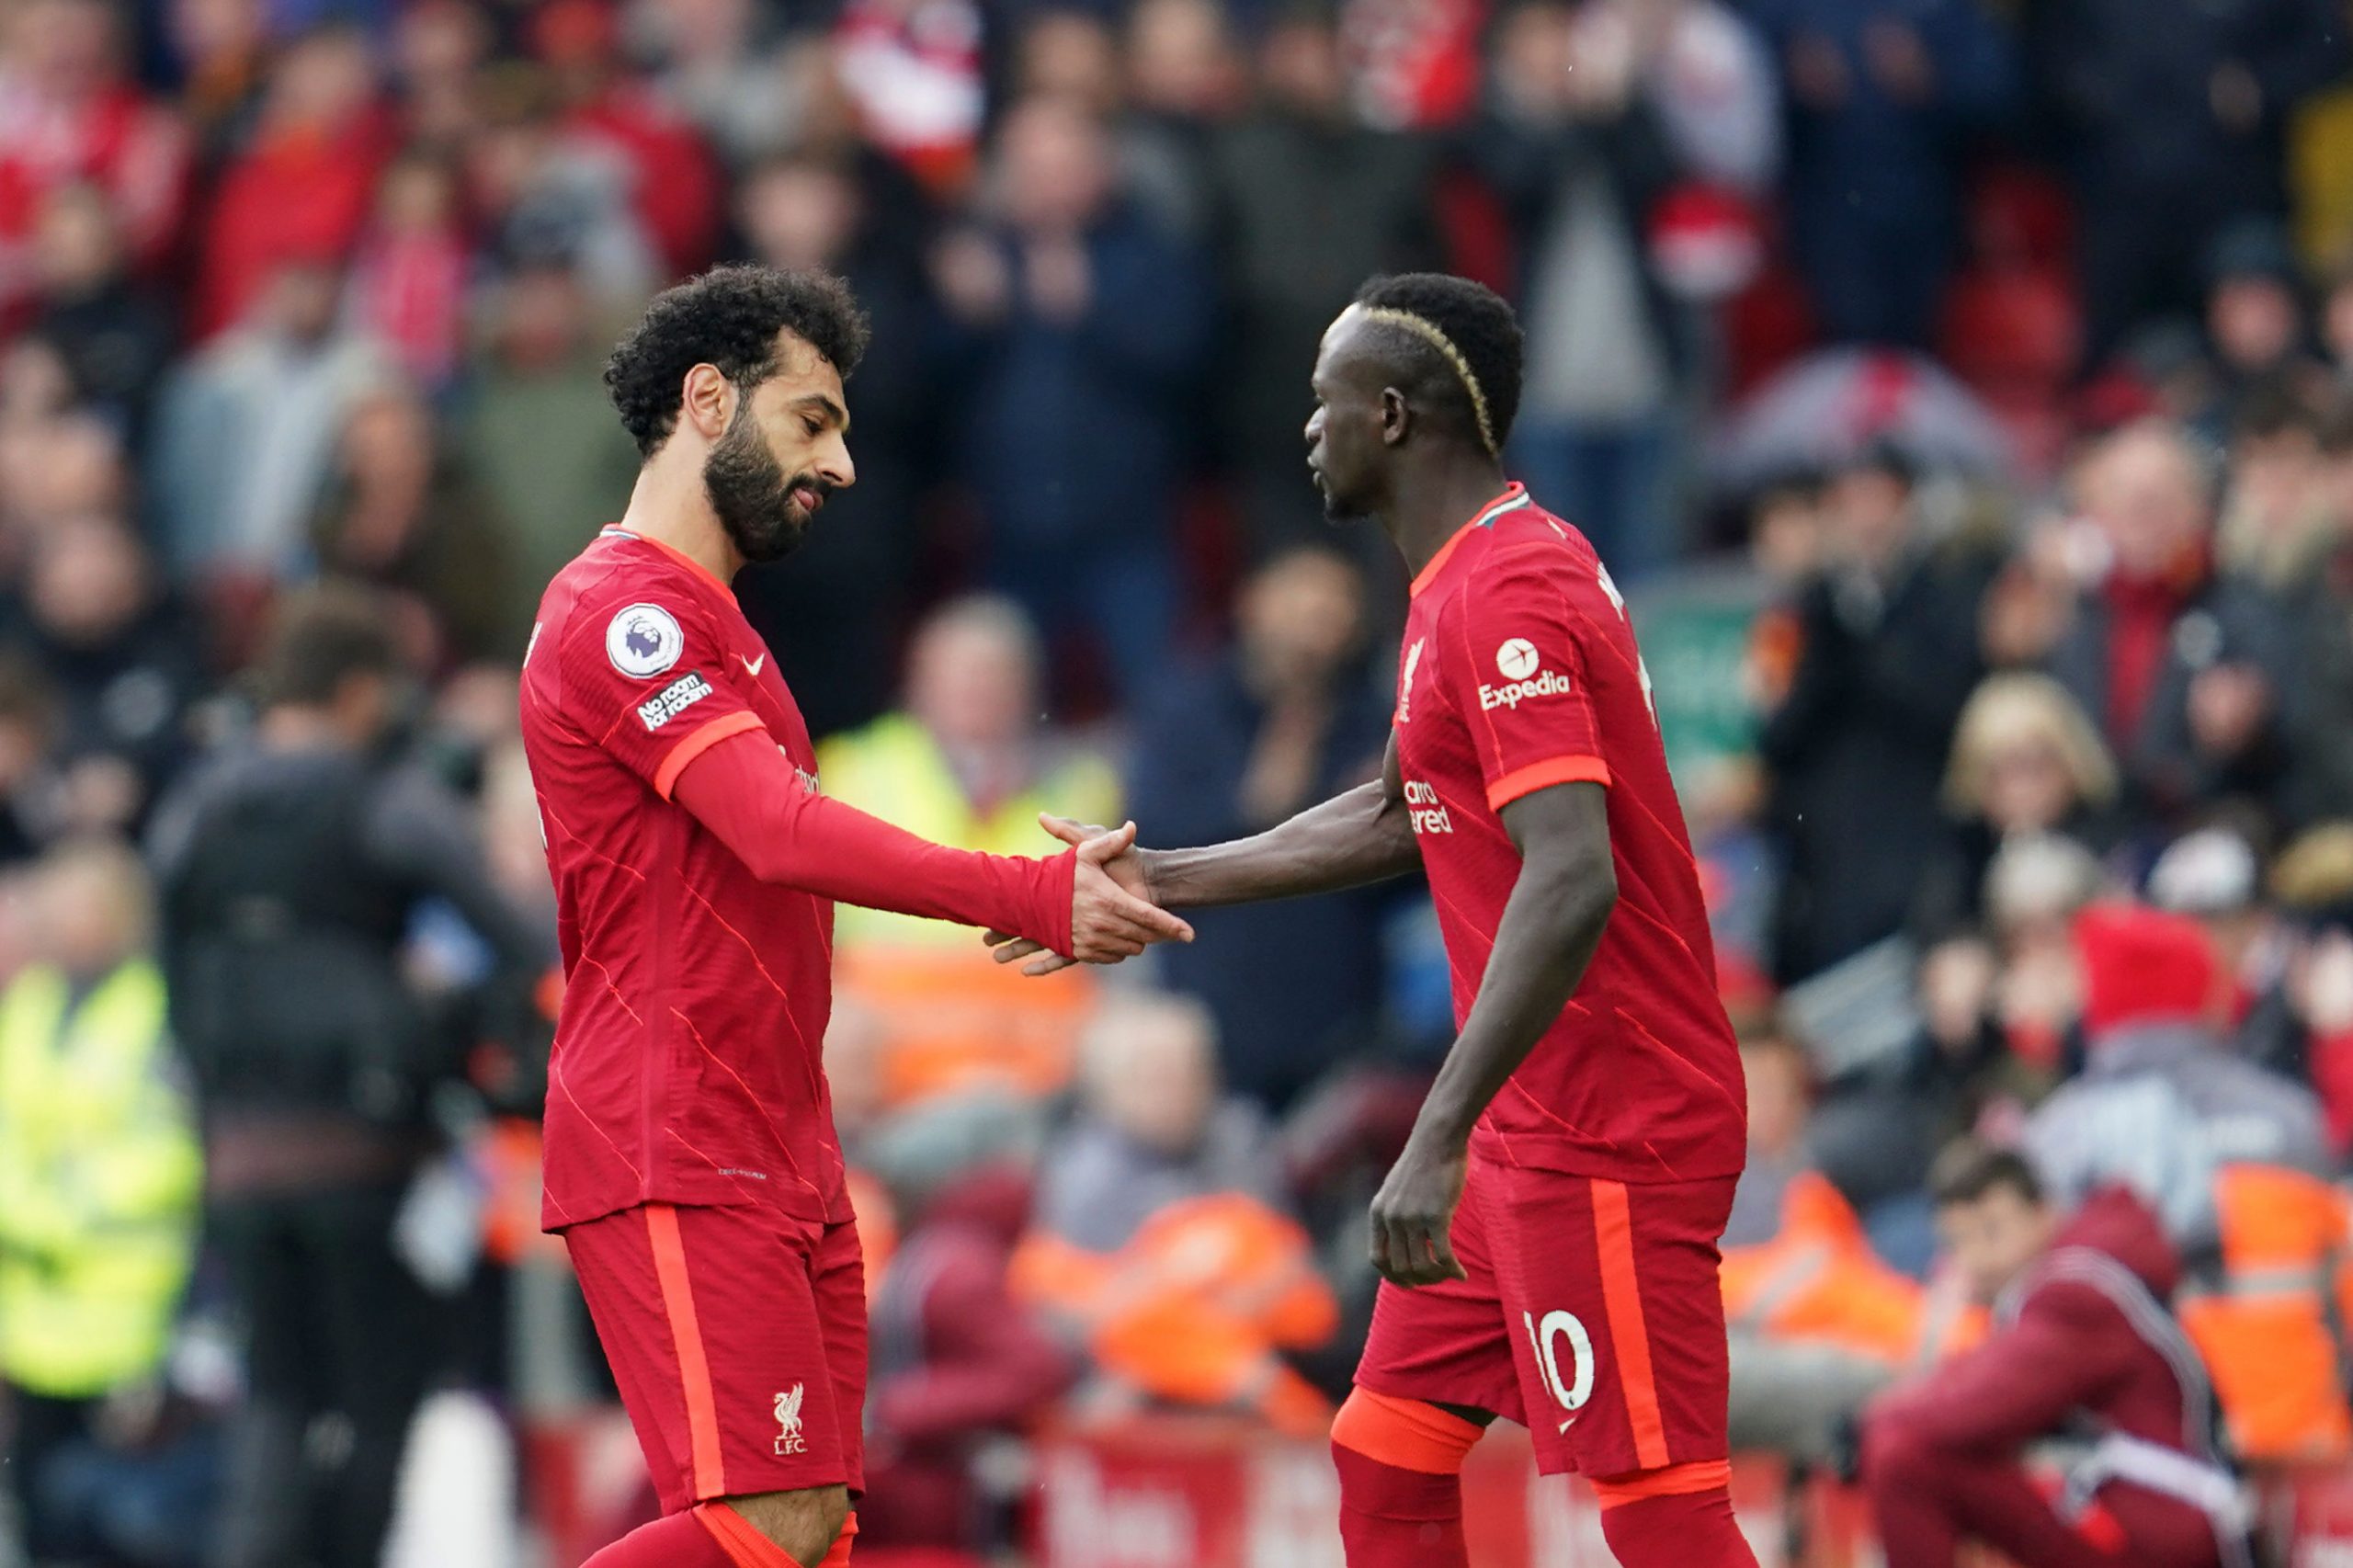 Manchester City and Liverpool meet again in FA Cup semifinal